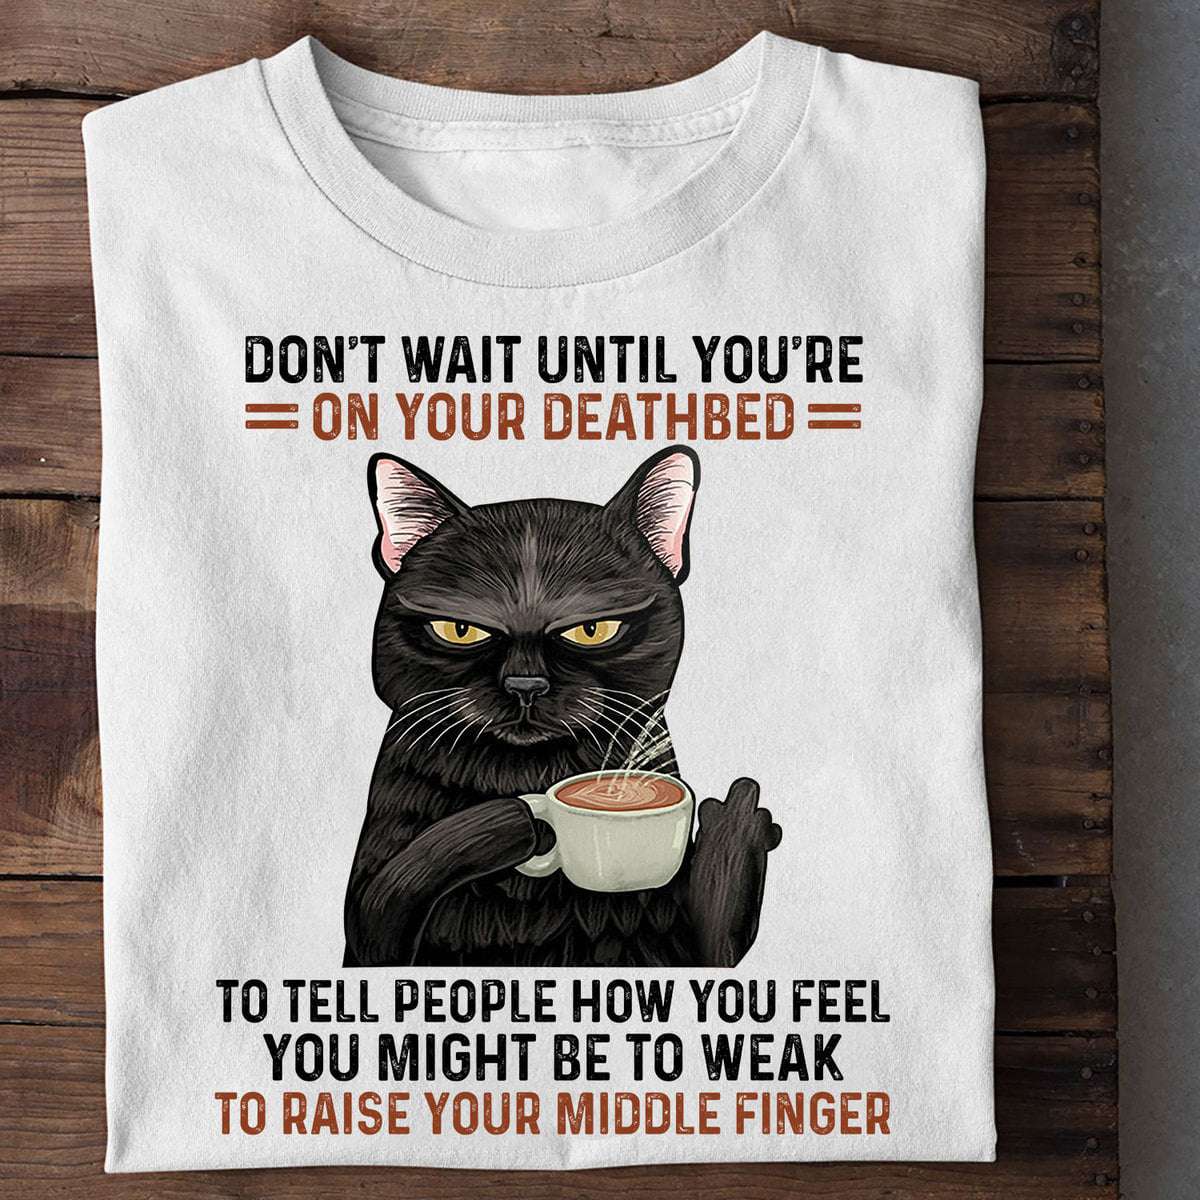 Bad Black Cat Coffee - Don't wait until you're on your deathbed to tell people how you feel you might be to weak to raise your middle finger